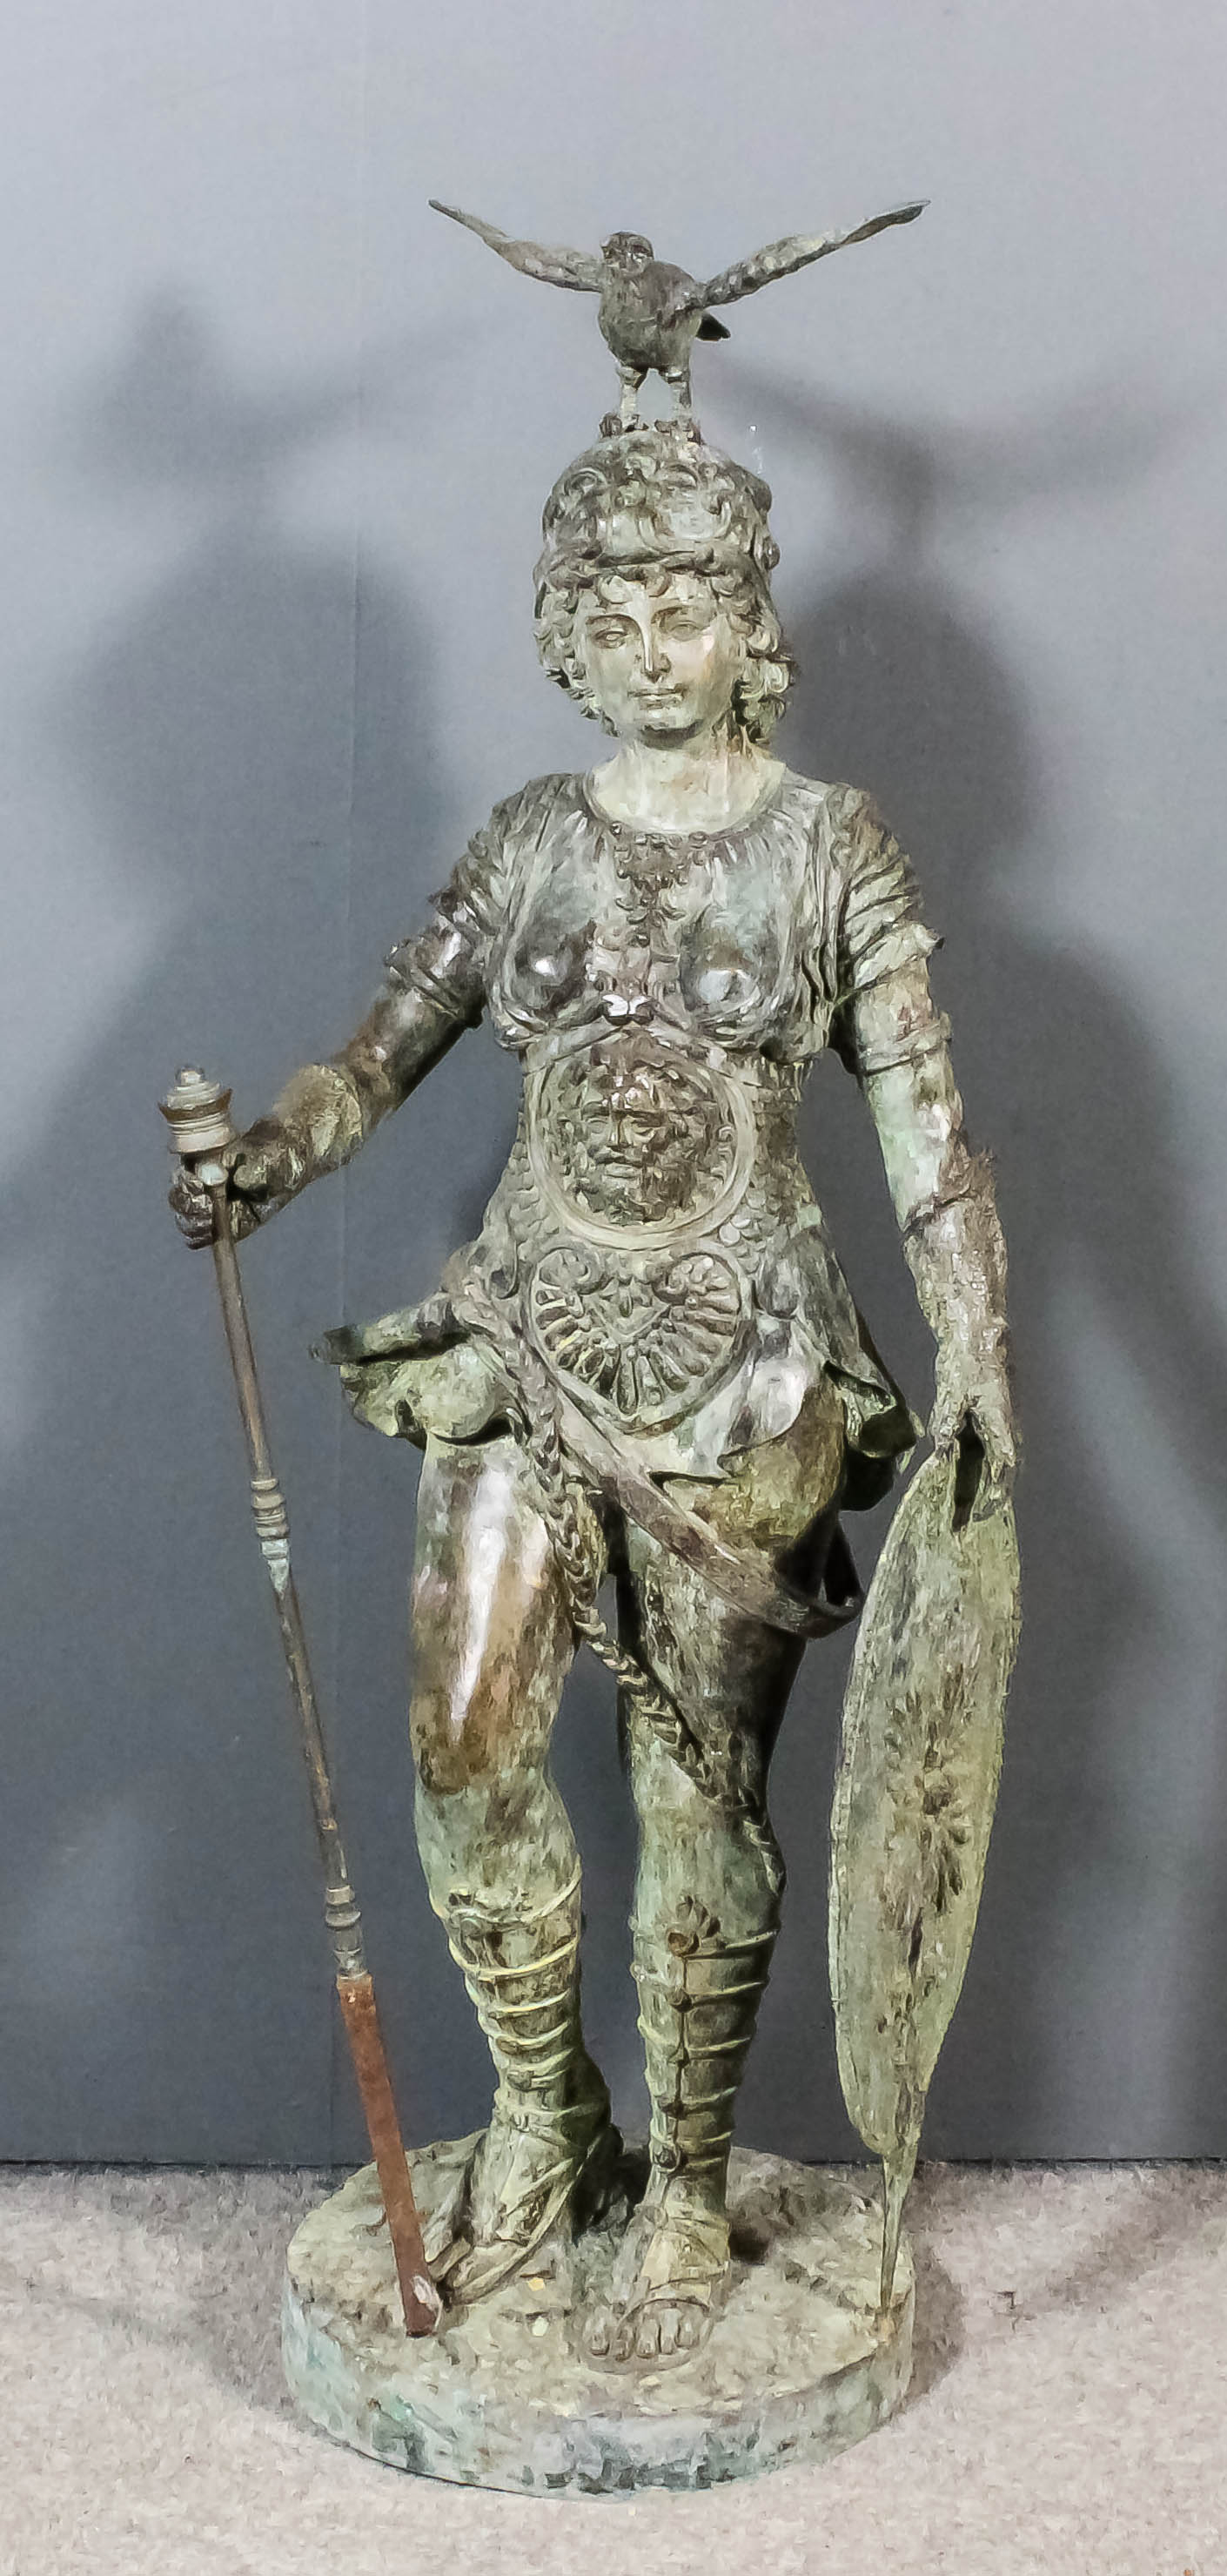 An 'antiqued' patinated bronze standing figure of Bellona - the Roman goddess of war ,wearing ornate